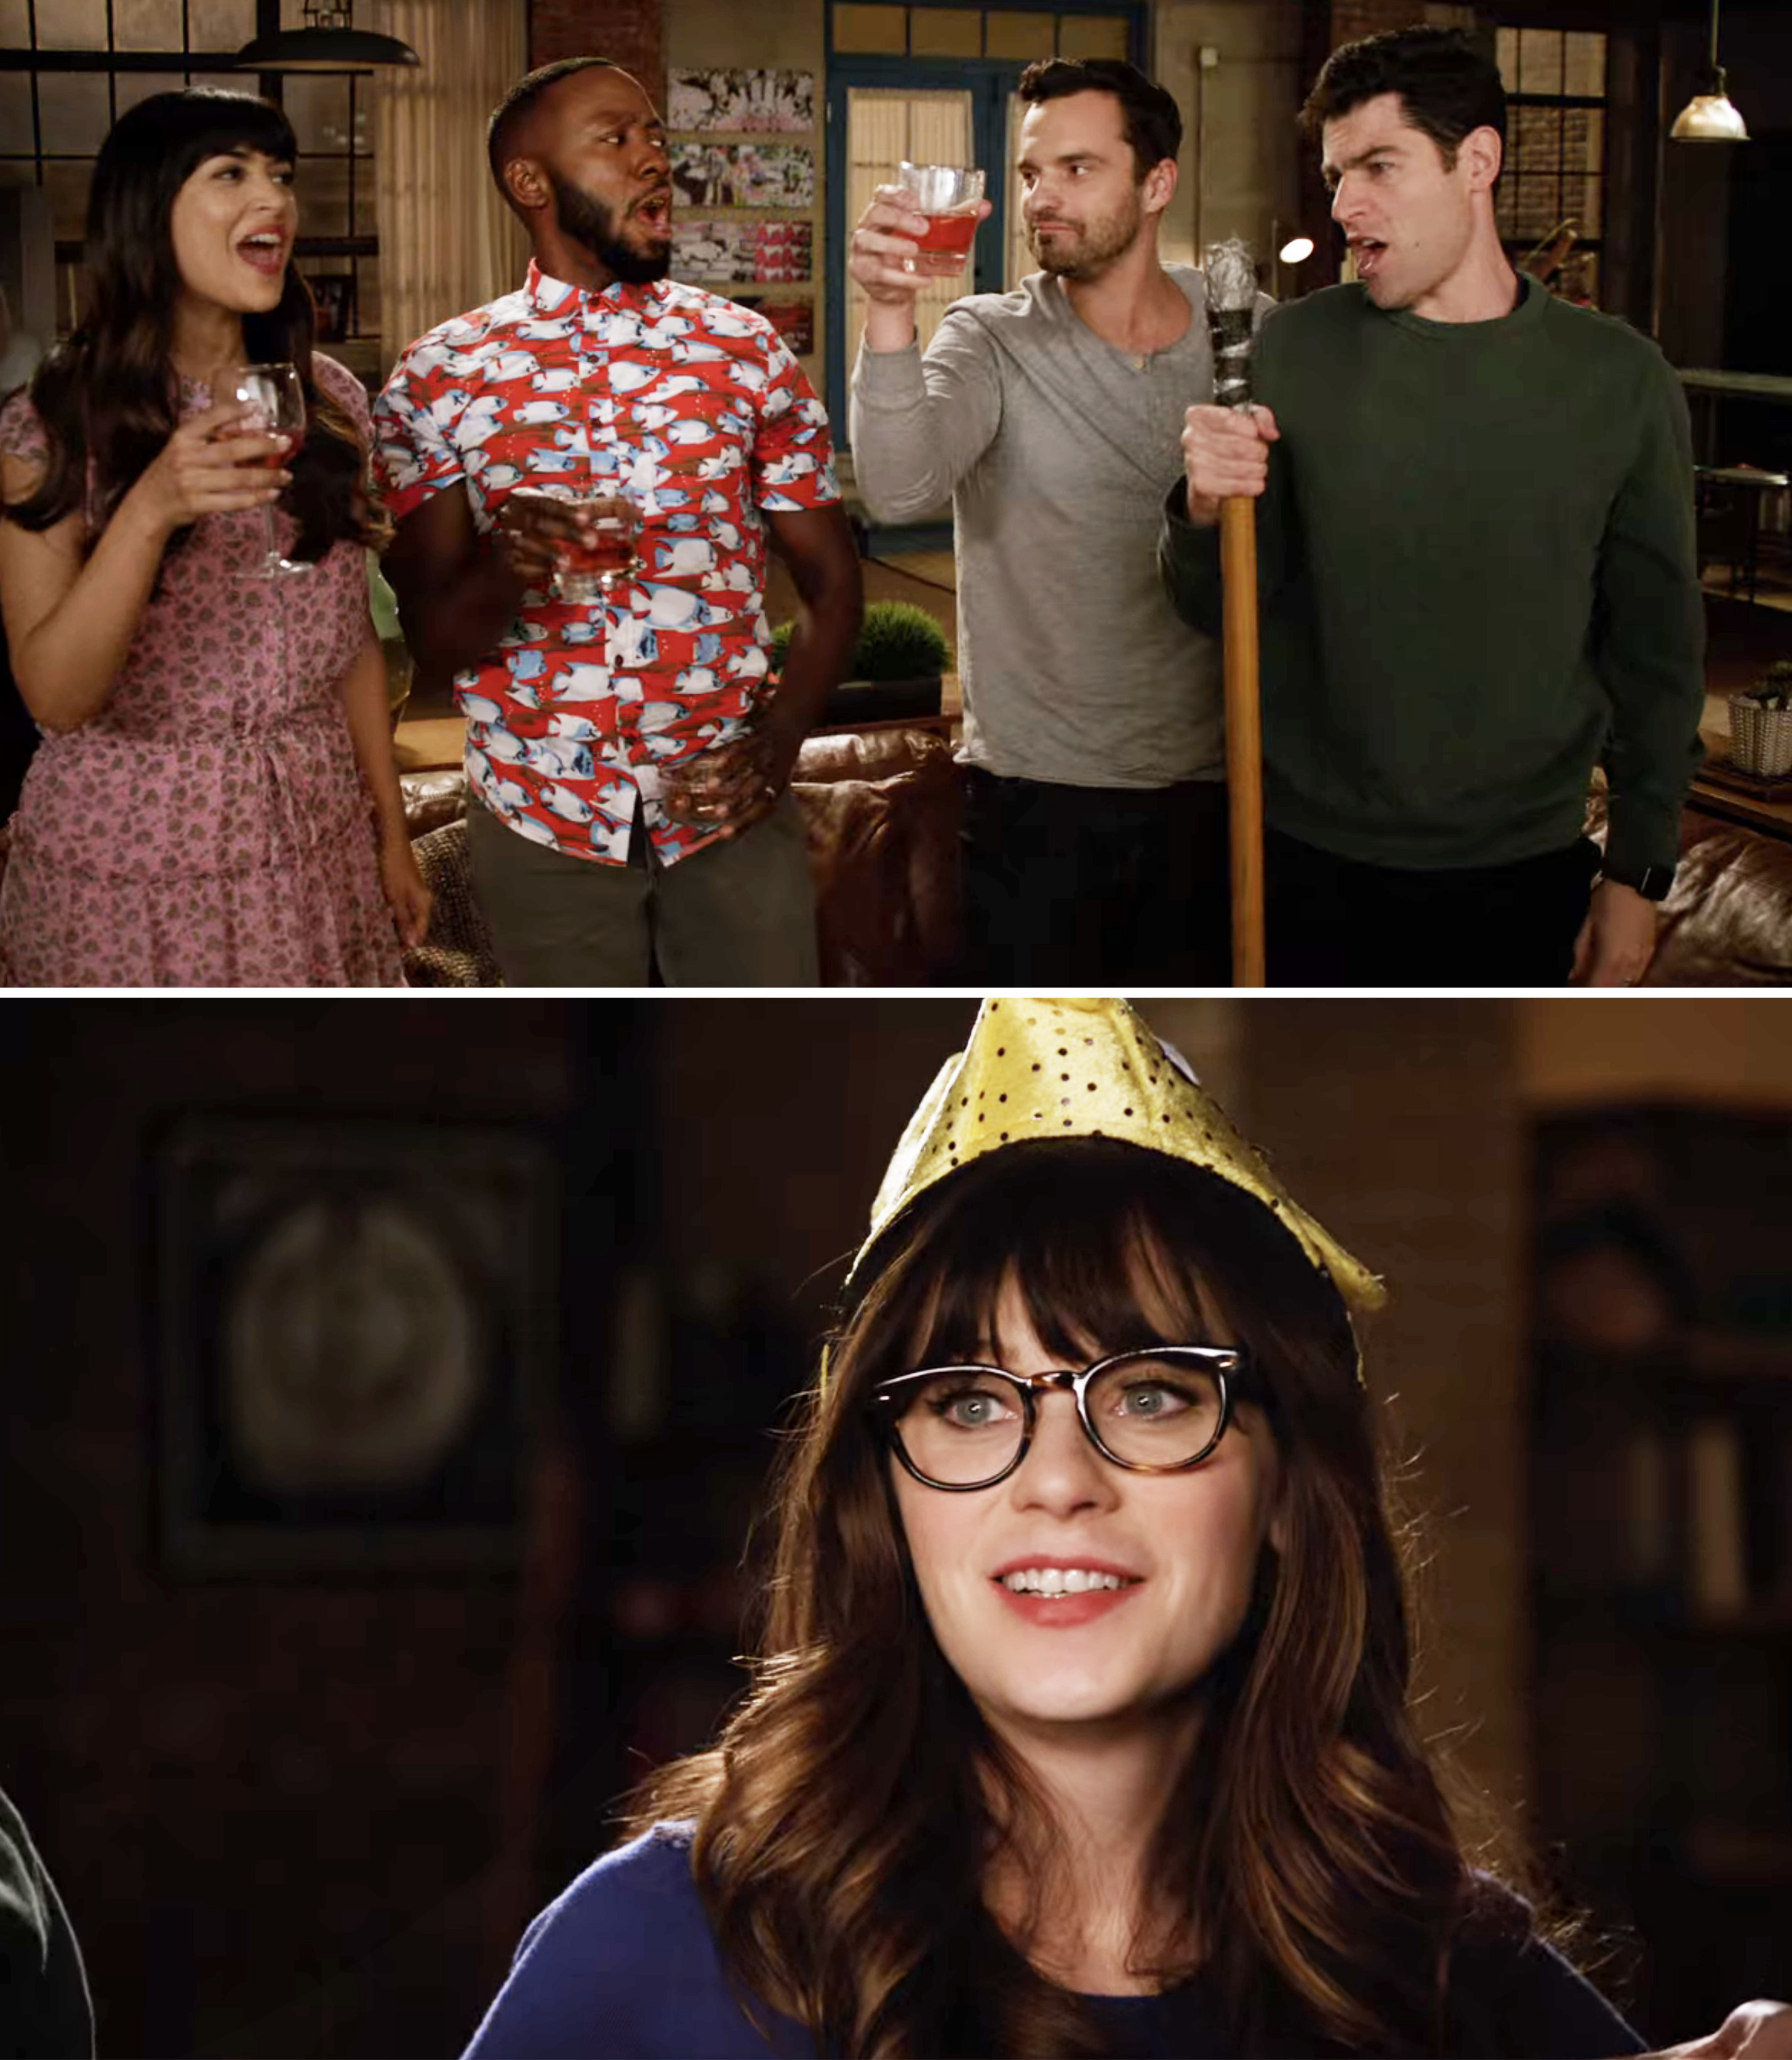 New Girl characters holding up glasses together, and Jessica Day wearing a party hat